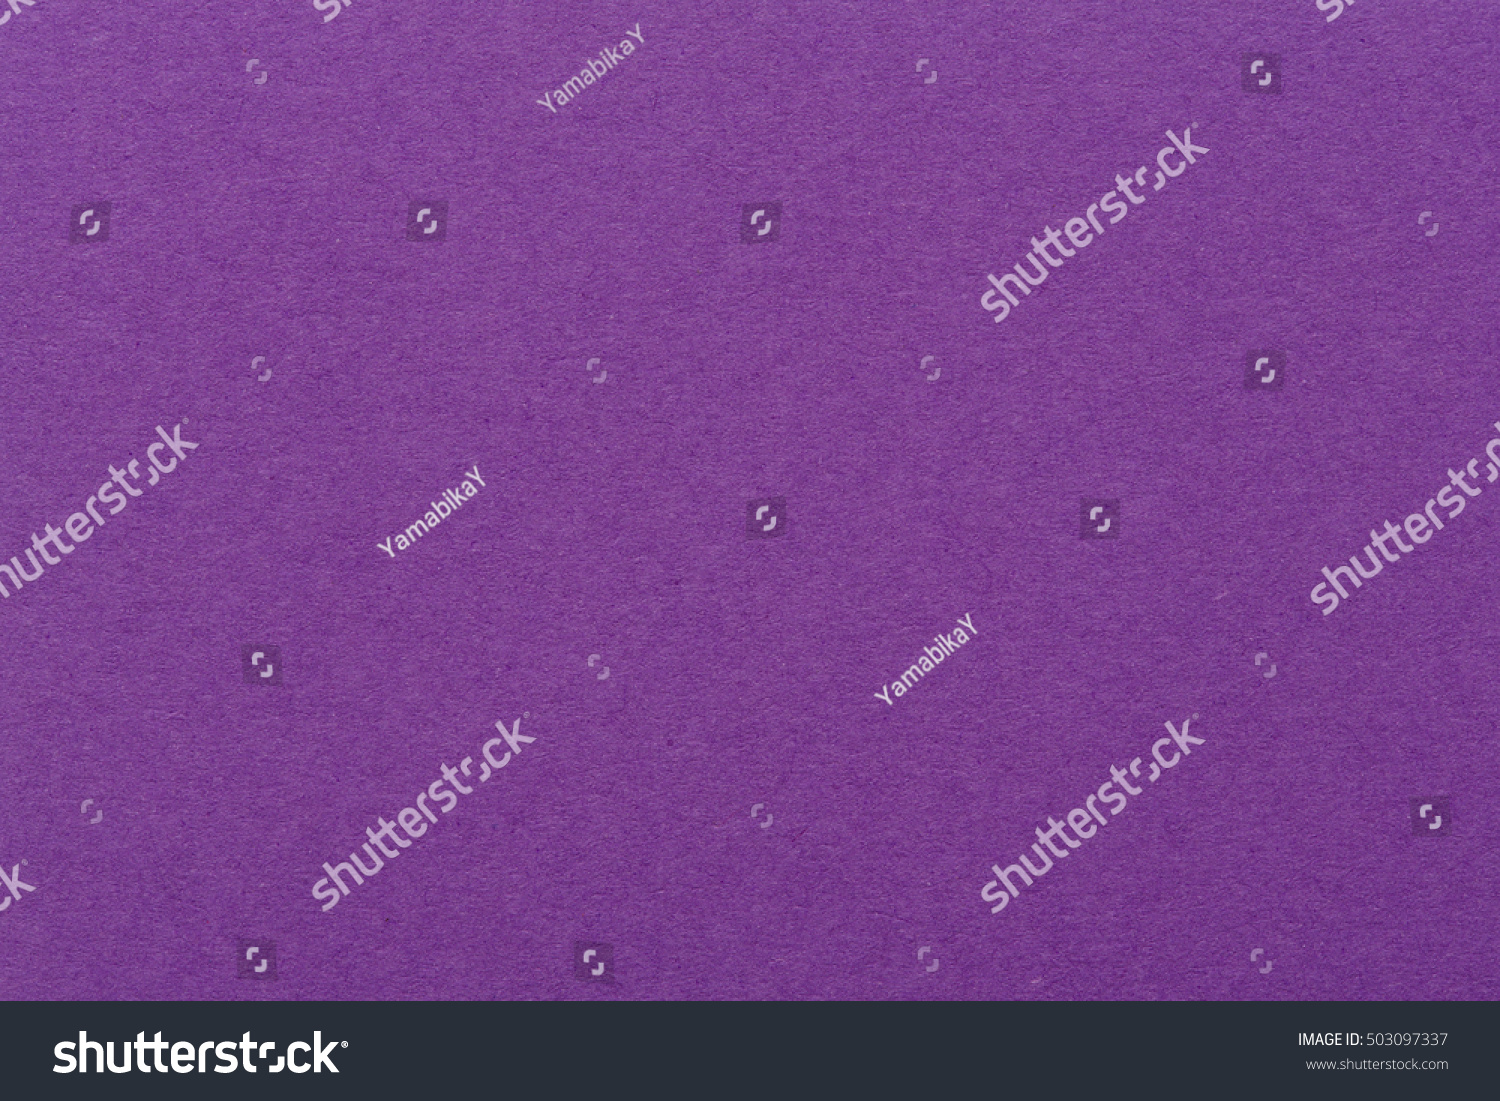 Purple Background Paper High Quality Texture Stock Photo 503097337